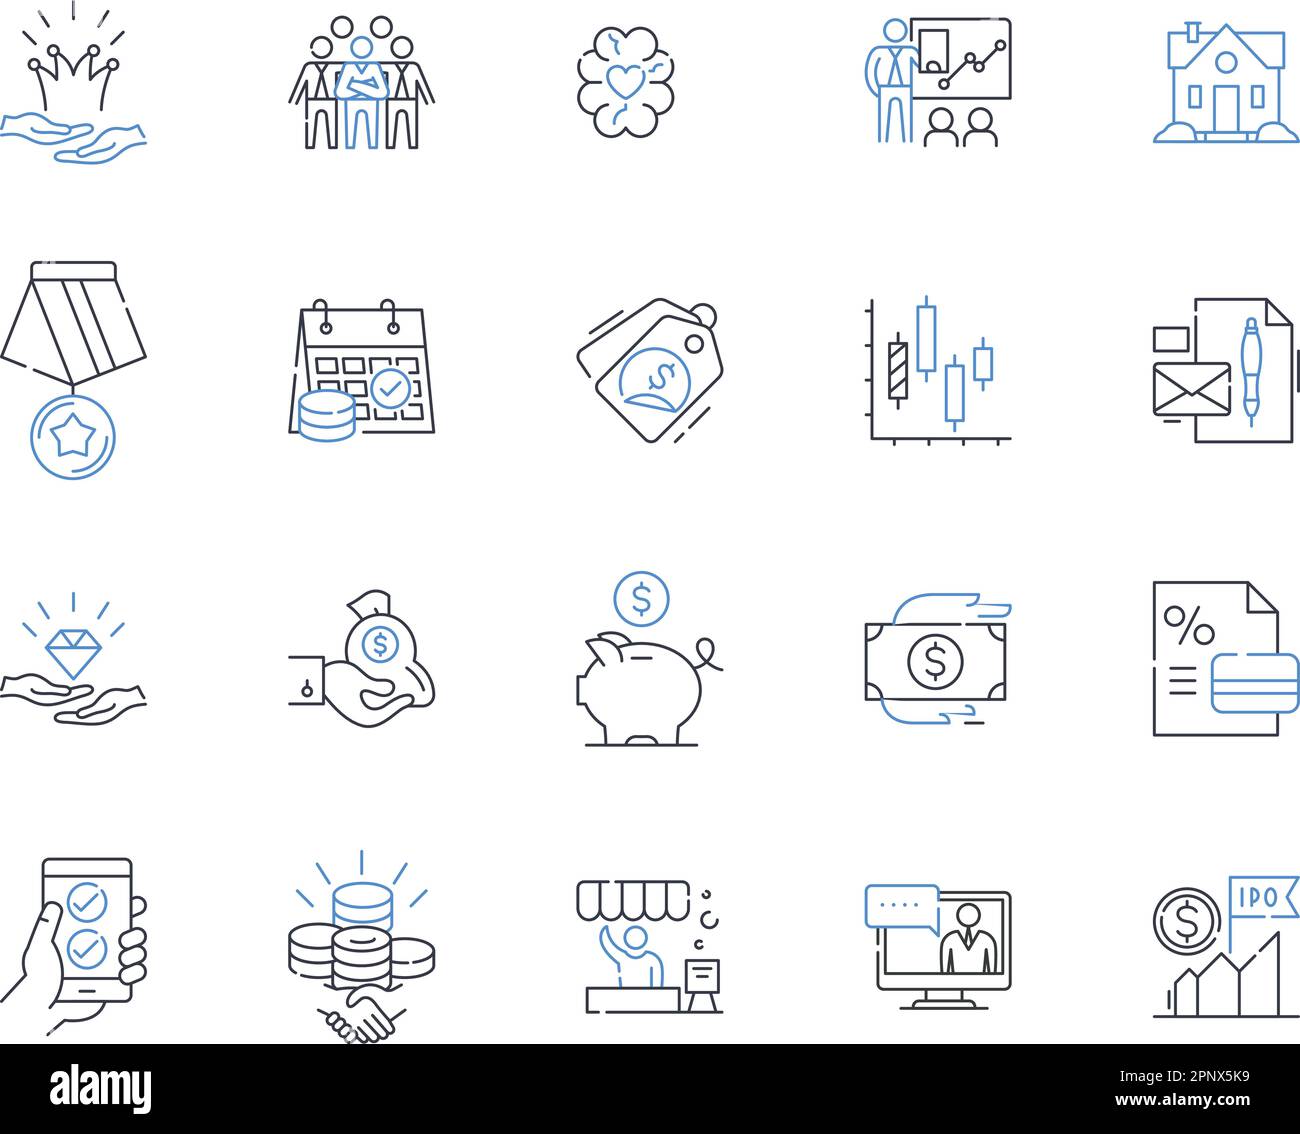 Clearance sales line icons collection. Deals, Discounts, Savings, Markdowns, Bargains, Reductions, Liquidations vector and linear illustration Stock Vector